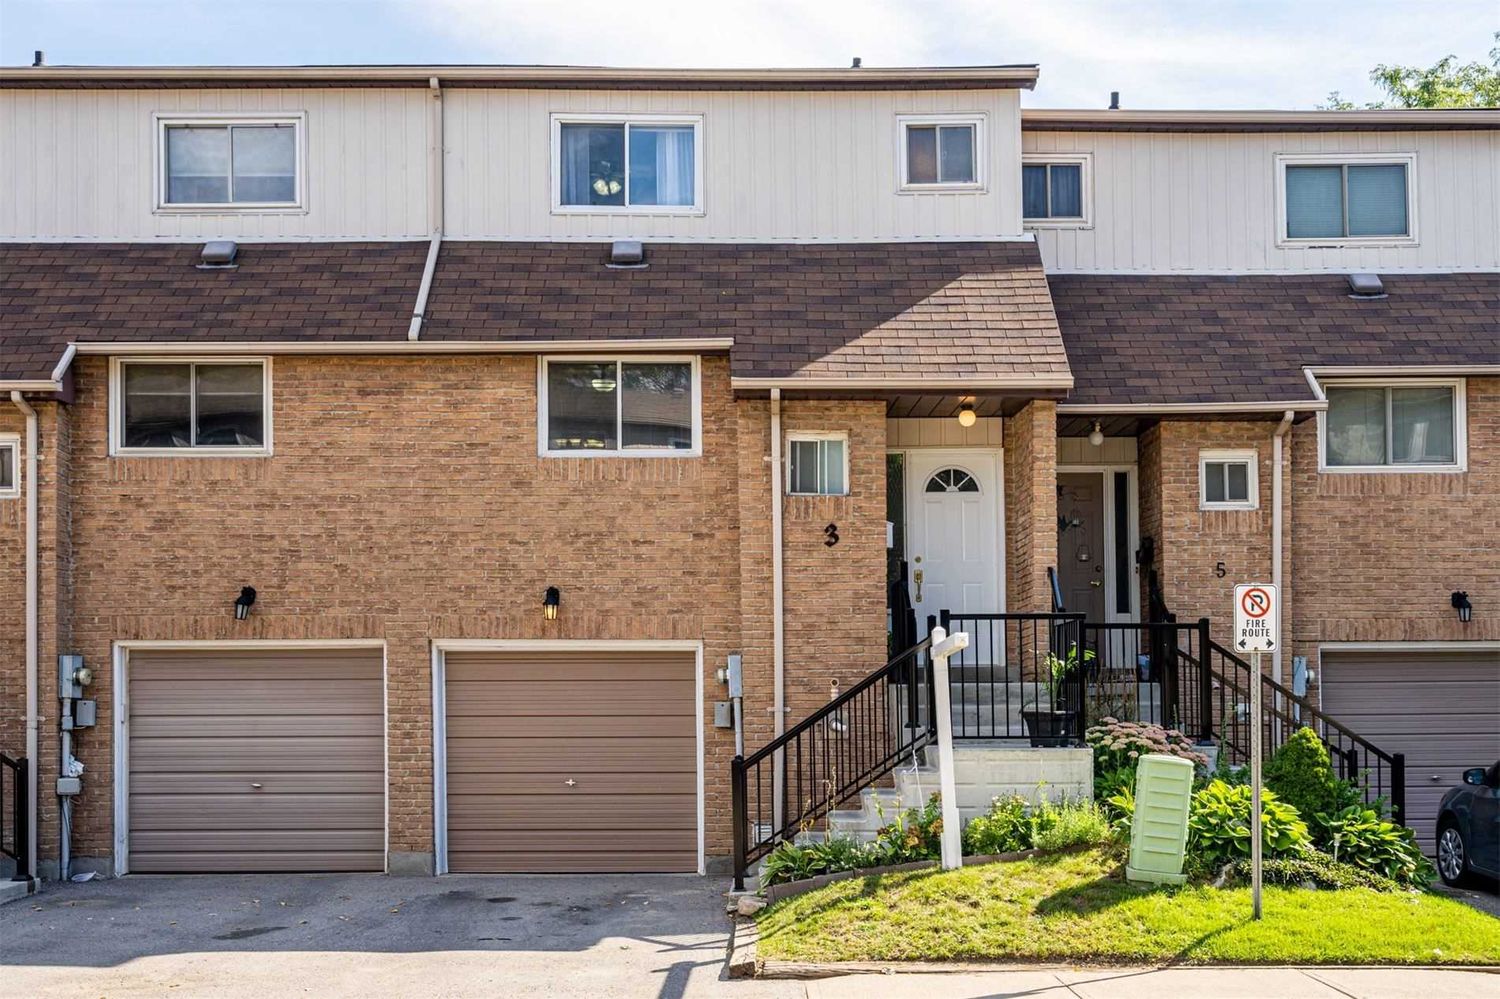 4-48 Randall Drive. Randall Drive Townhomes is located in  Ajax, Toronto - image #1 of 2